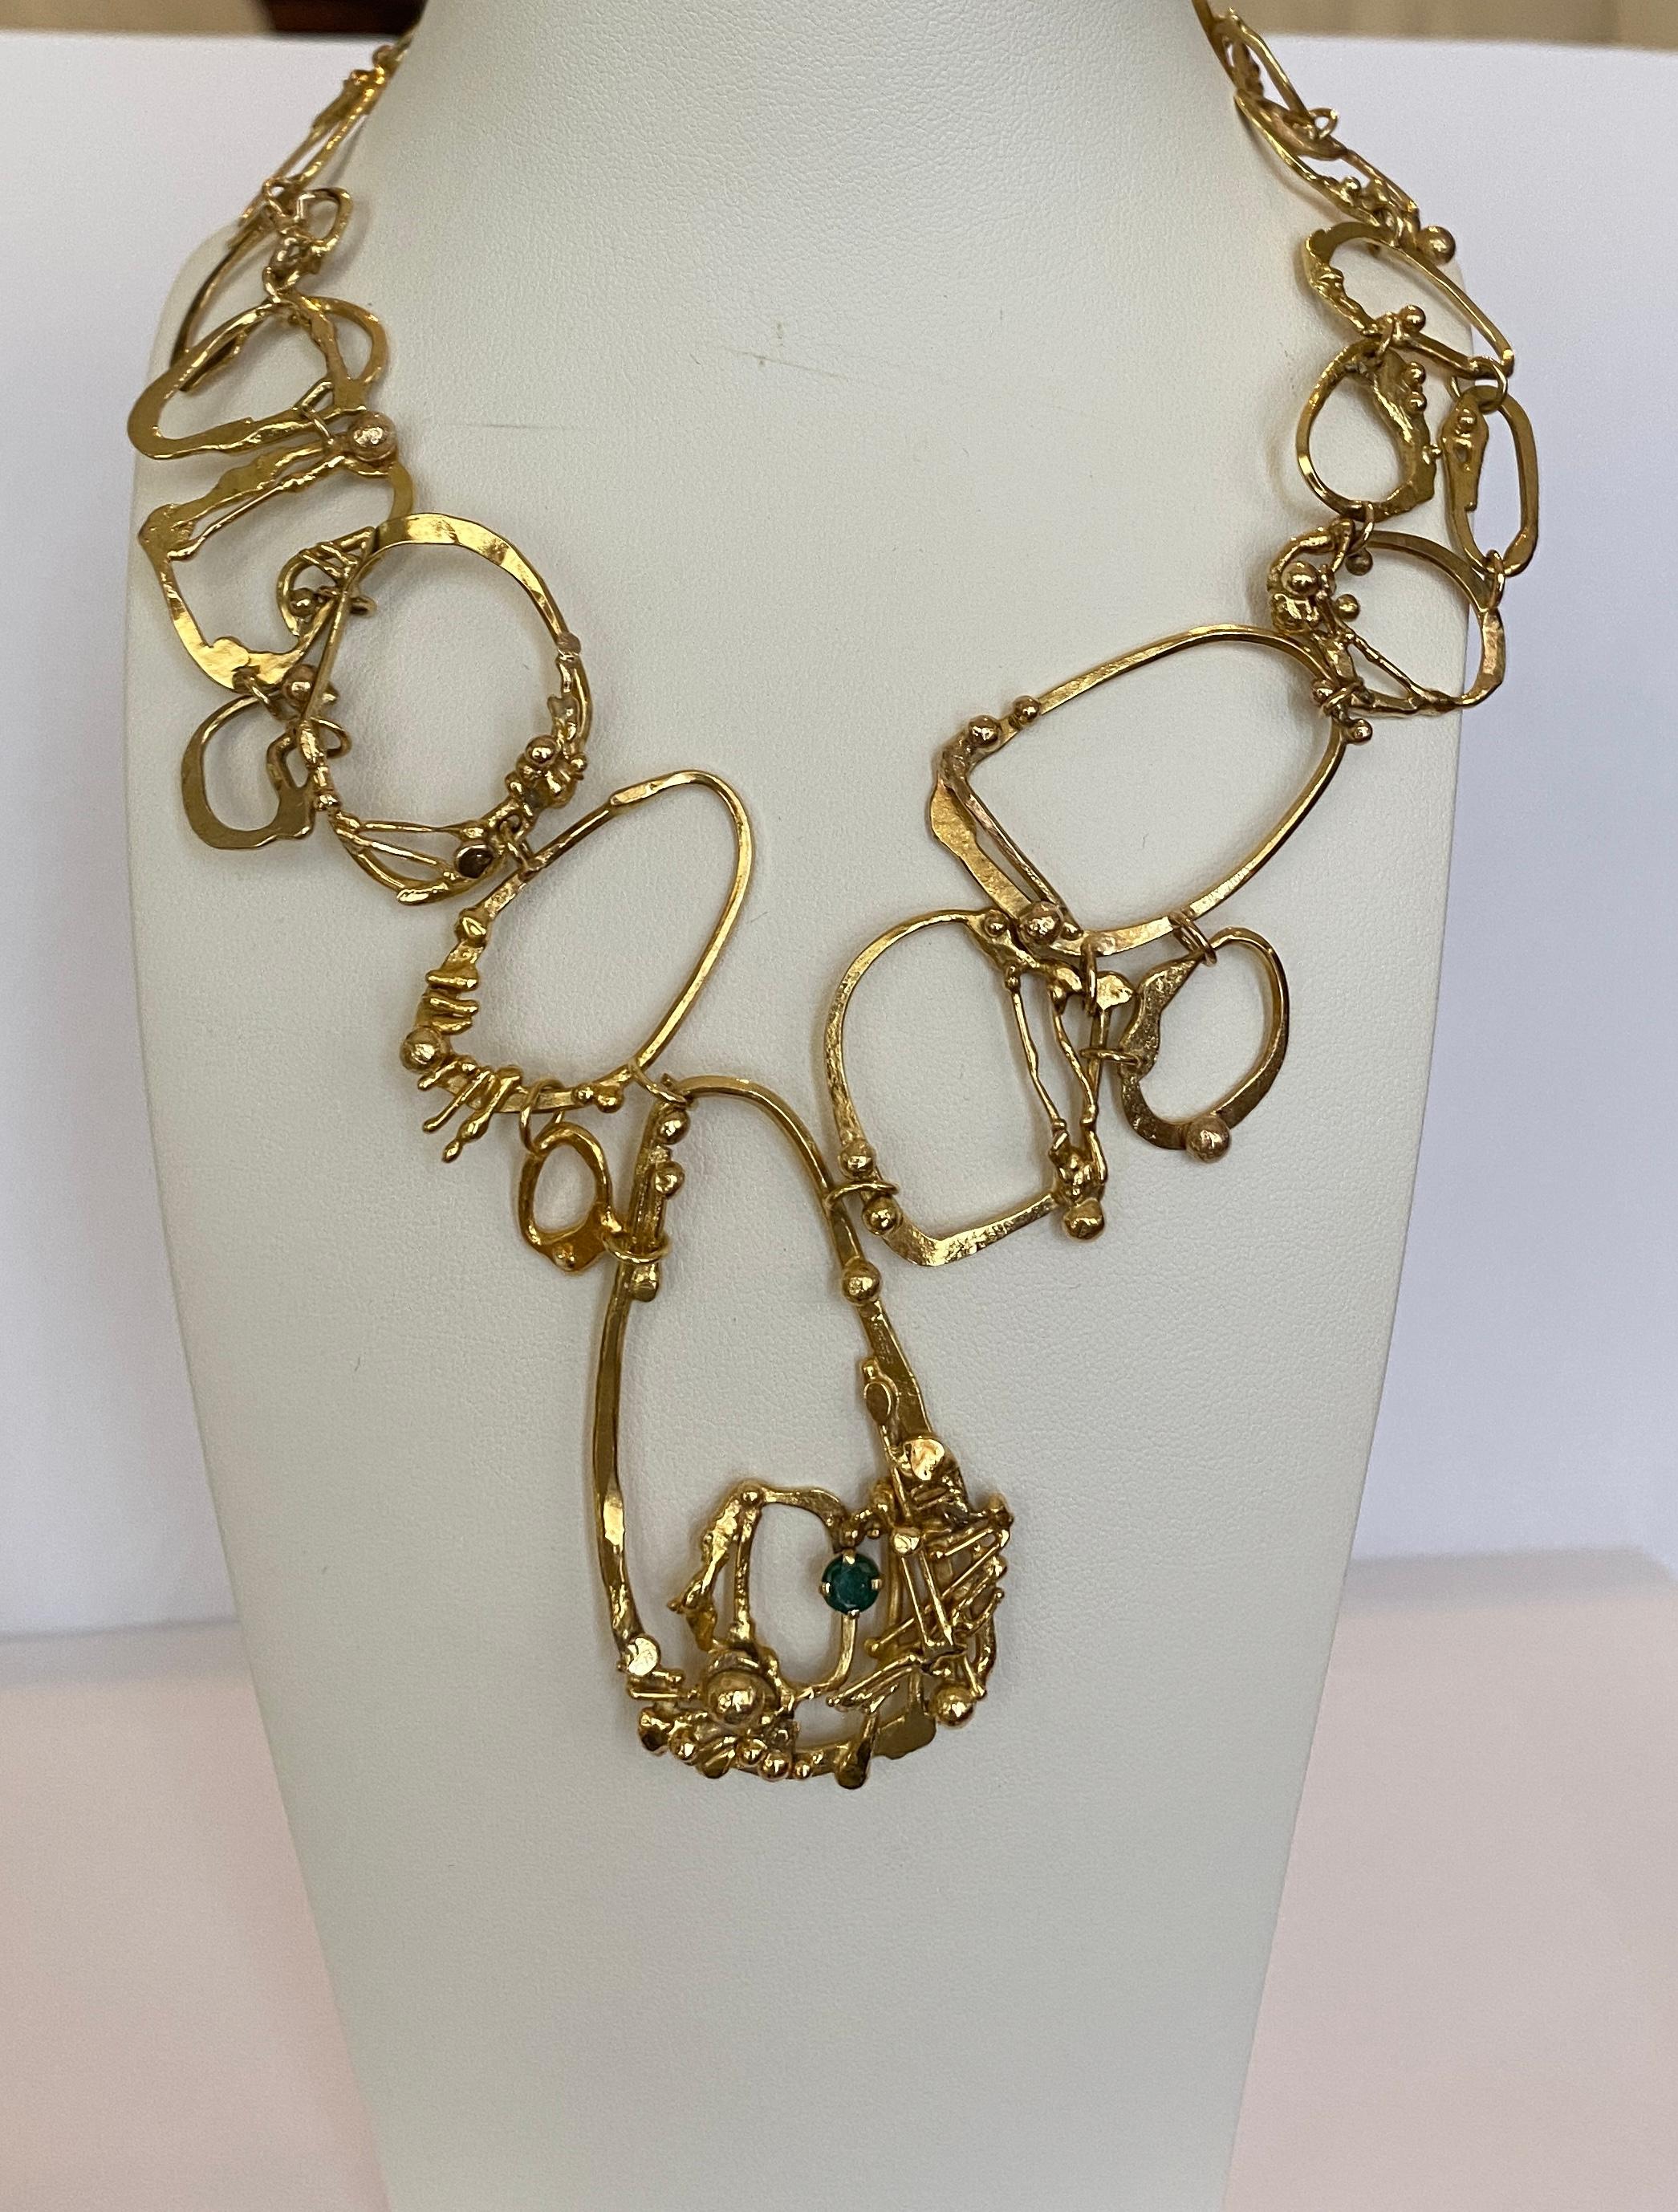 Offered in good condition, 14 KT yellow gold handmade design necklace with 1 piece of round cut emerald approx. 0.40 ct. Origin: Israel

Necklace has been marked 14 KT
Natural emerald: 0.40 crt (treatment unknown)
Weight: 61.2 grams
Length of the